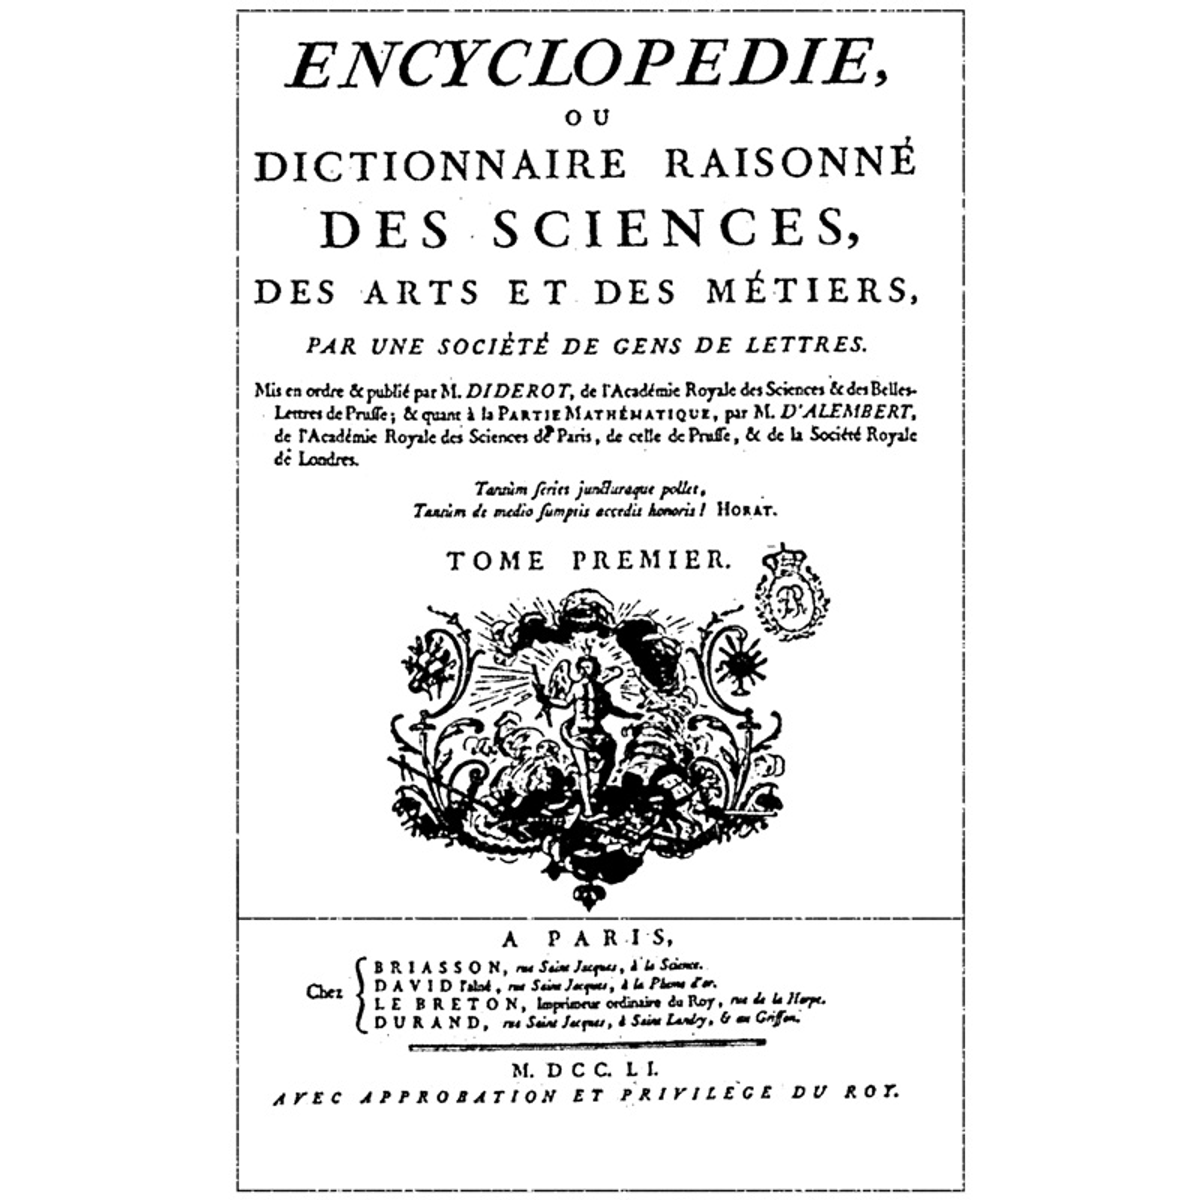 Diderot's and d'Alembert's Encyclopaedia